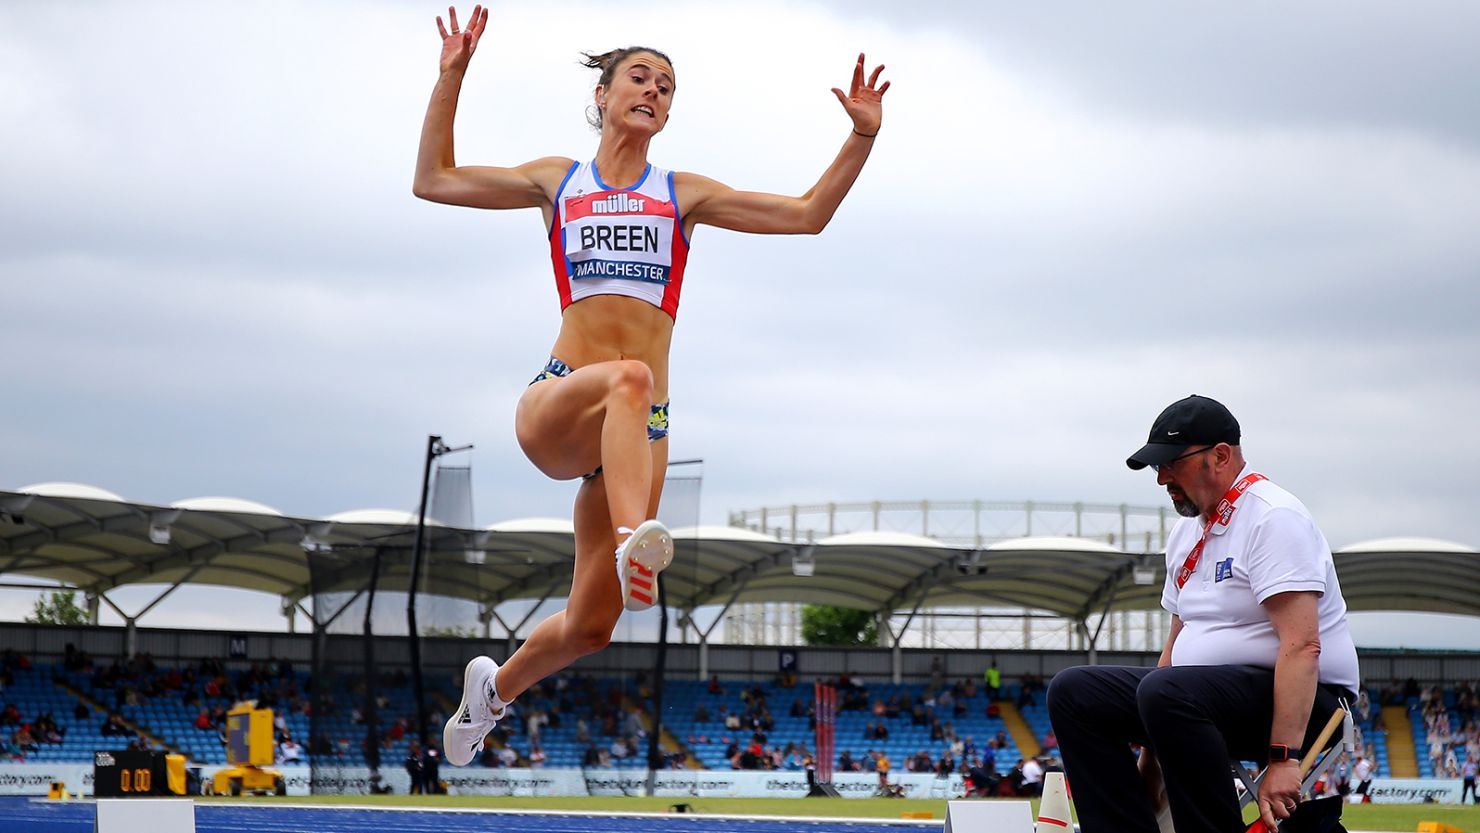 Olivia Breen competing in the Women's Long Jump Final at the Muller British Athletics Championships in Manchester, England on June 27, 2021 